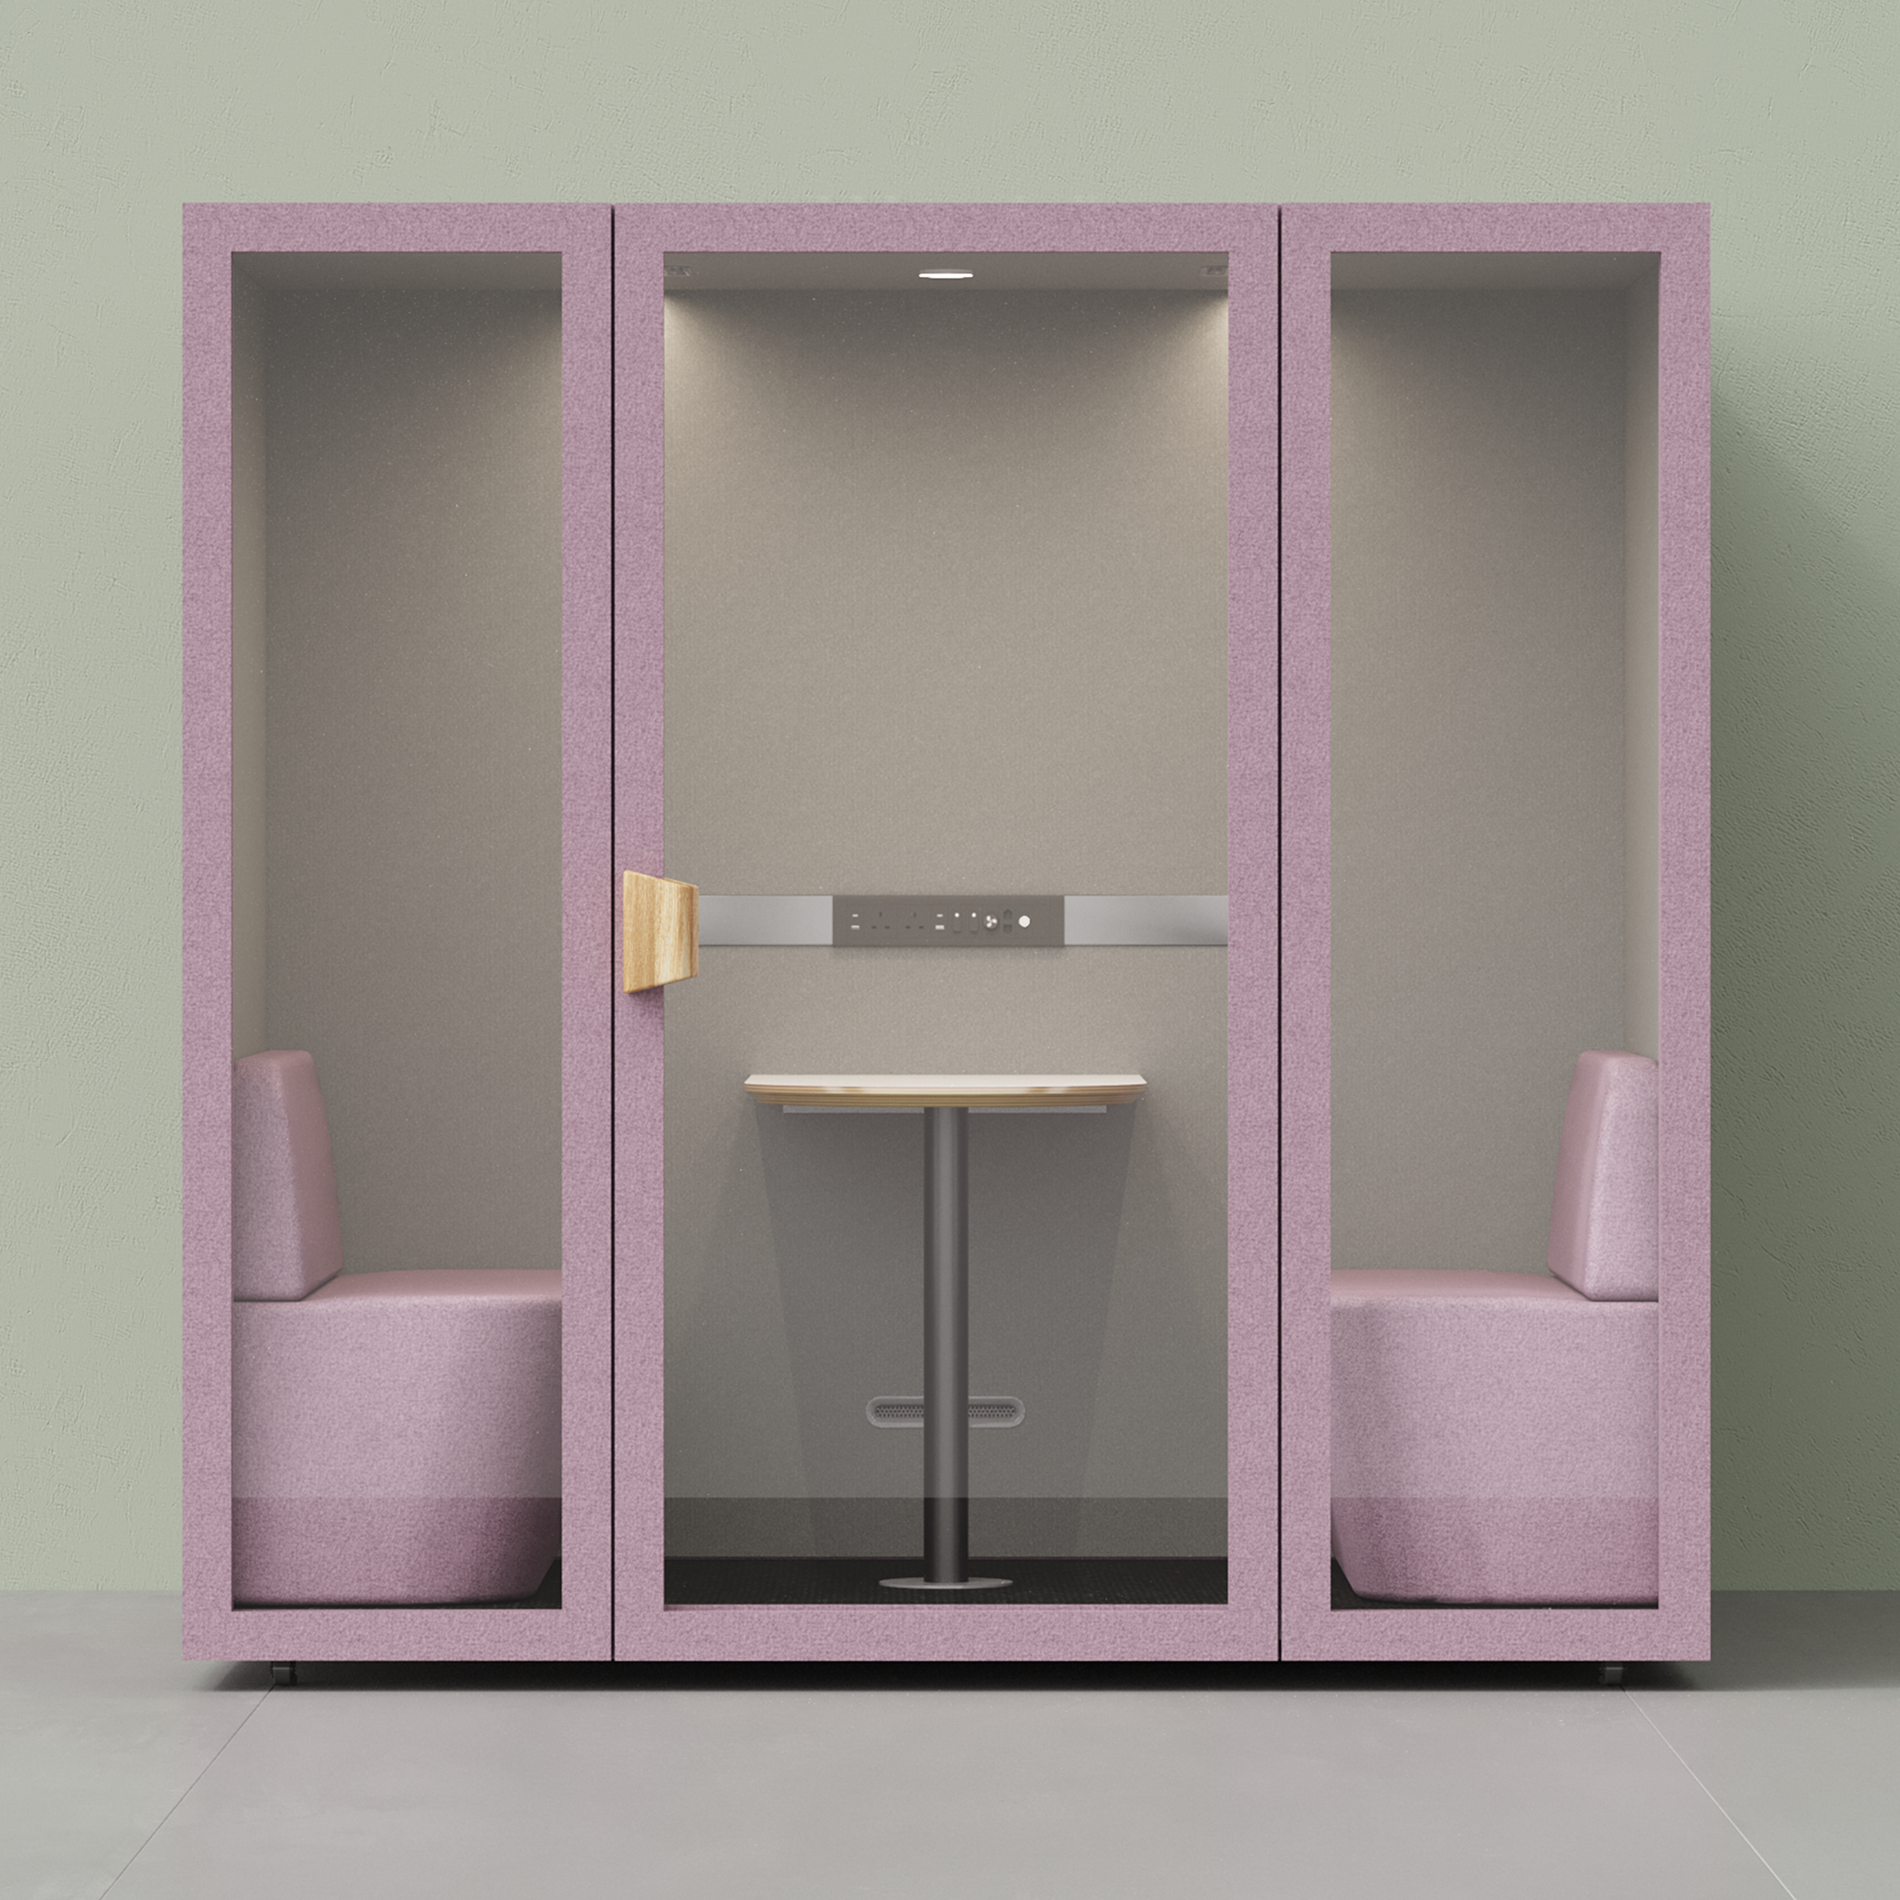 2 - 4 Person Meeting BoothFolio Blush / Furniture As Per Images